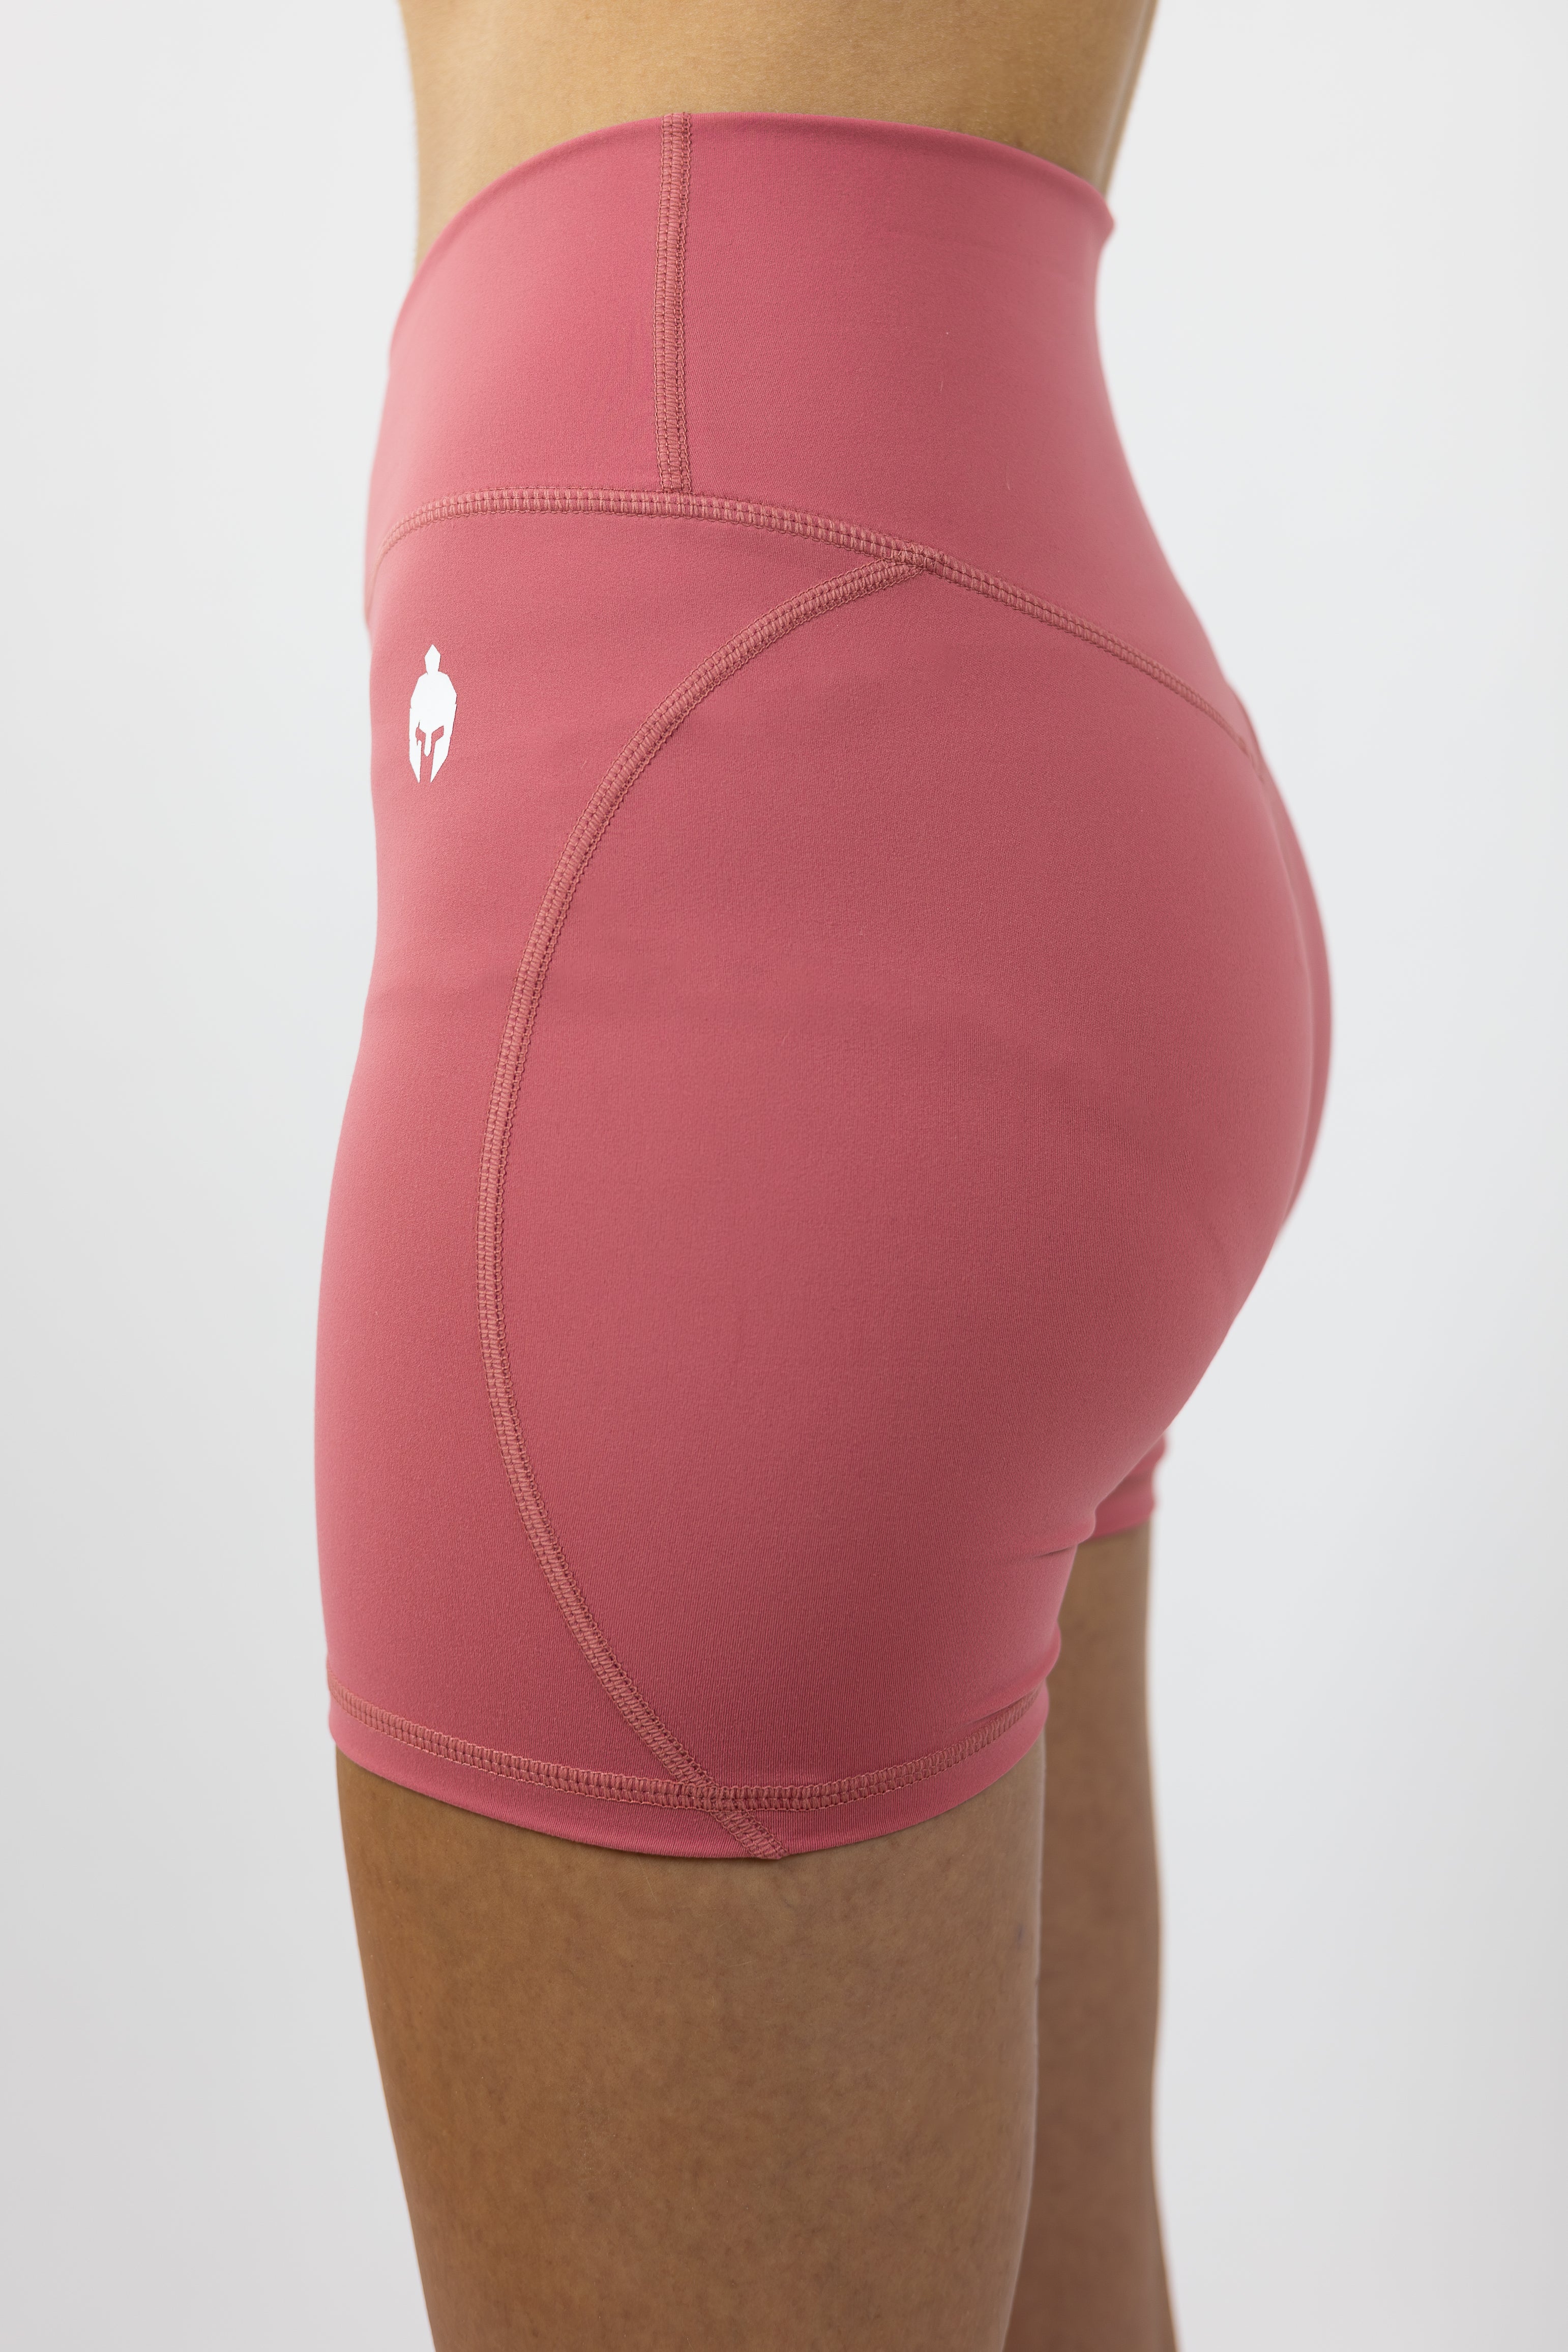 medium pink form fitting Strength of One gym shorts with warrior logo on right hip modeled by woman